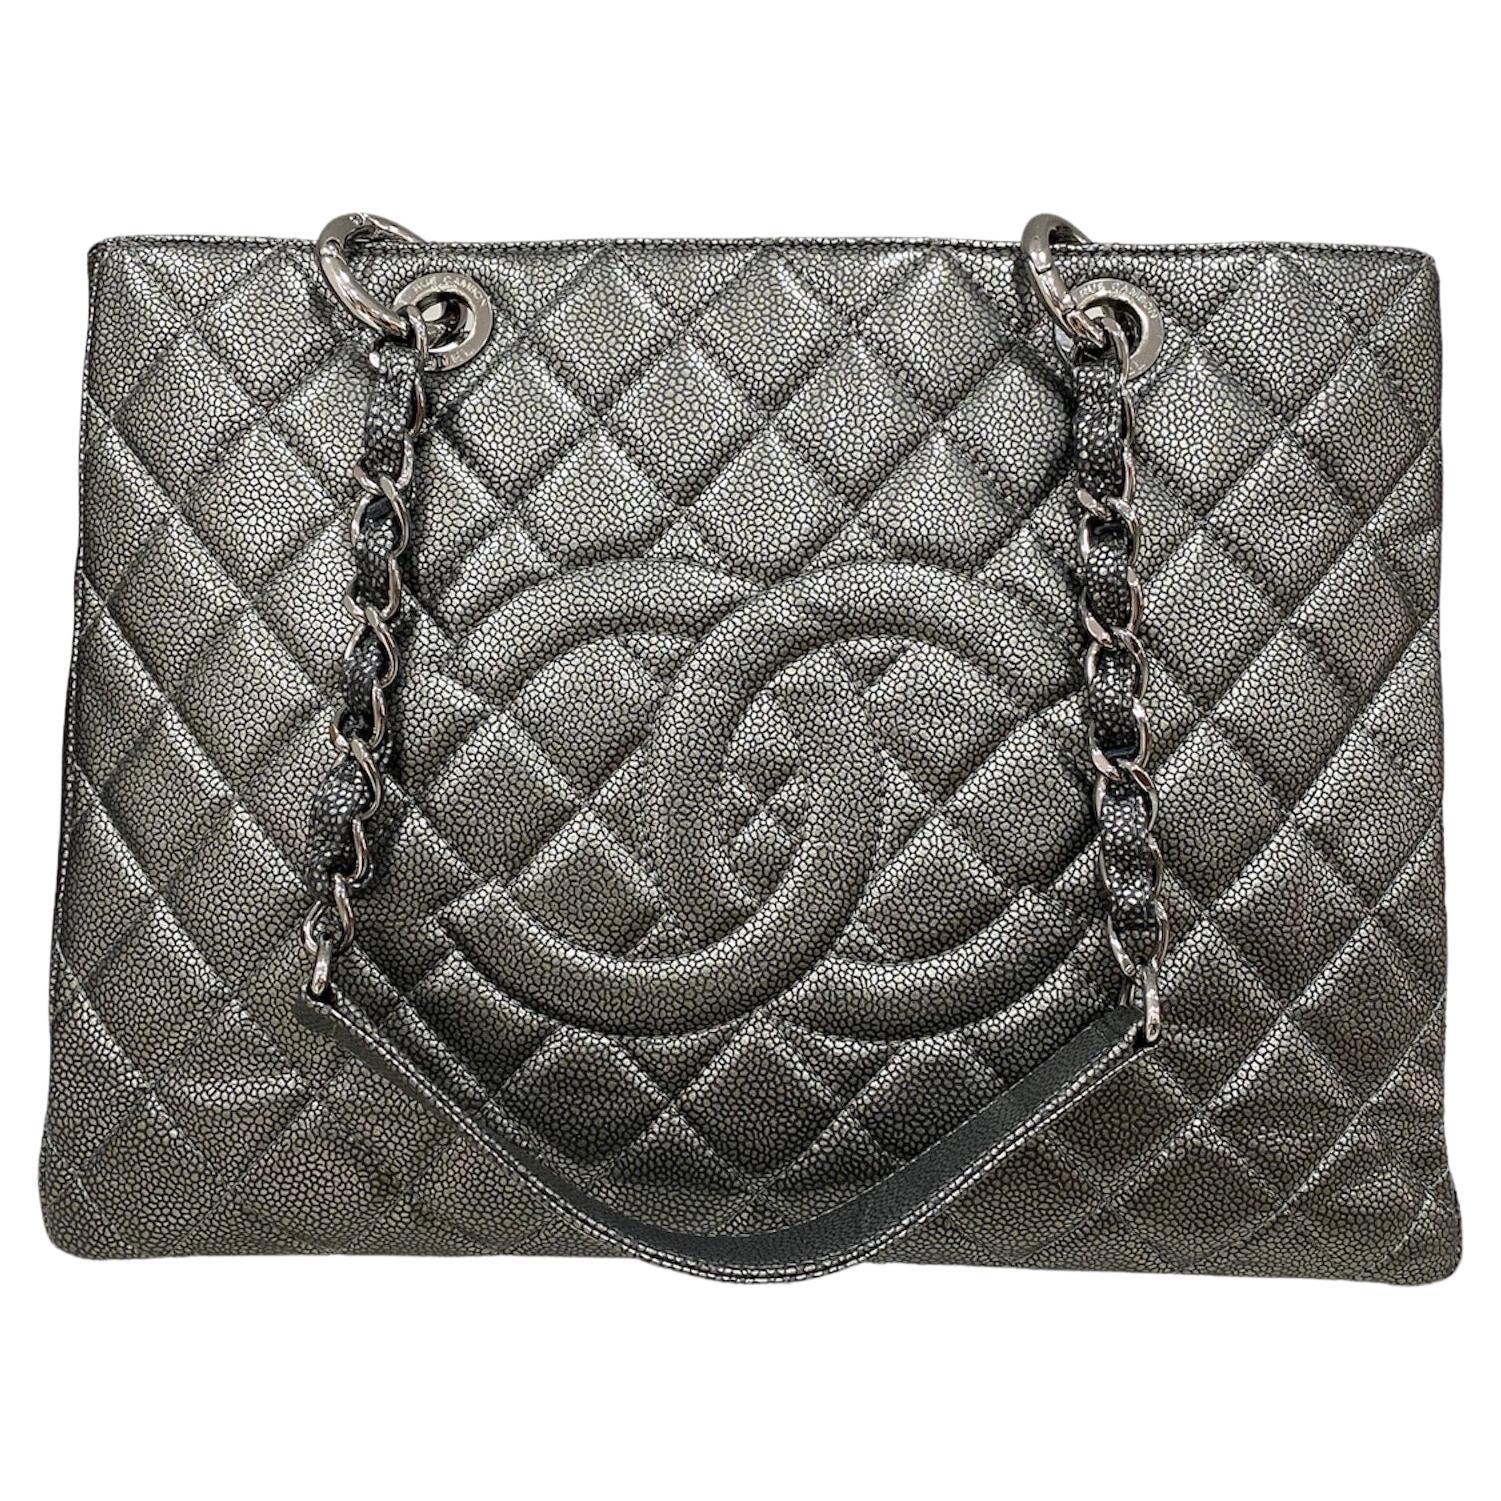 2011 Chanel GST Metallic Grey For Sale at 1stDibs